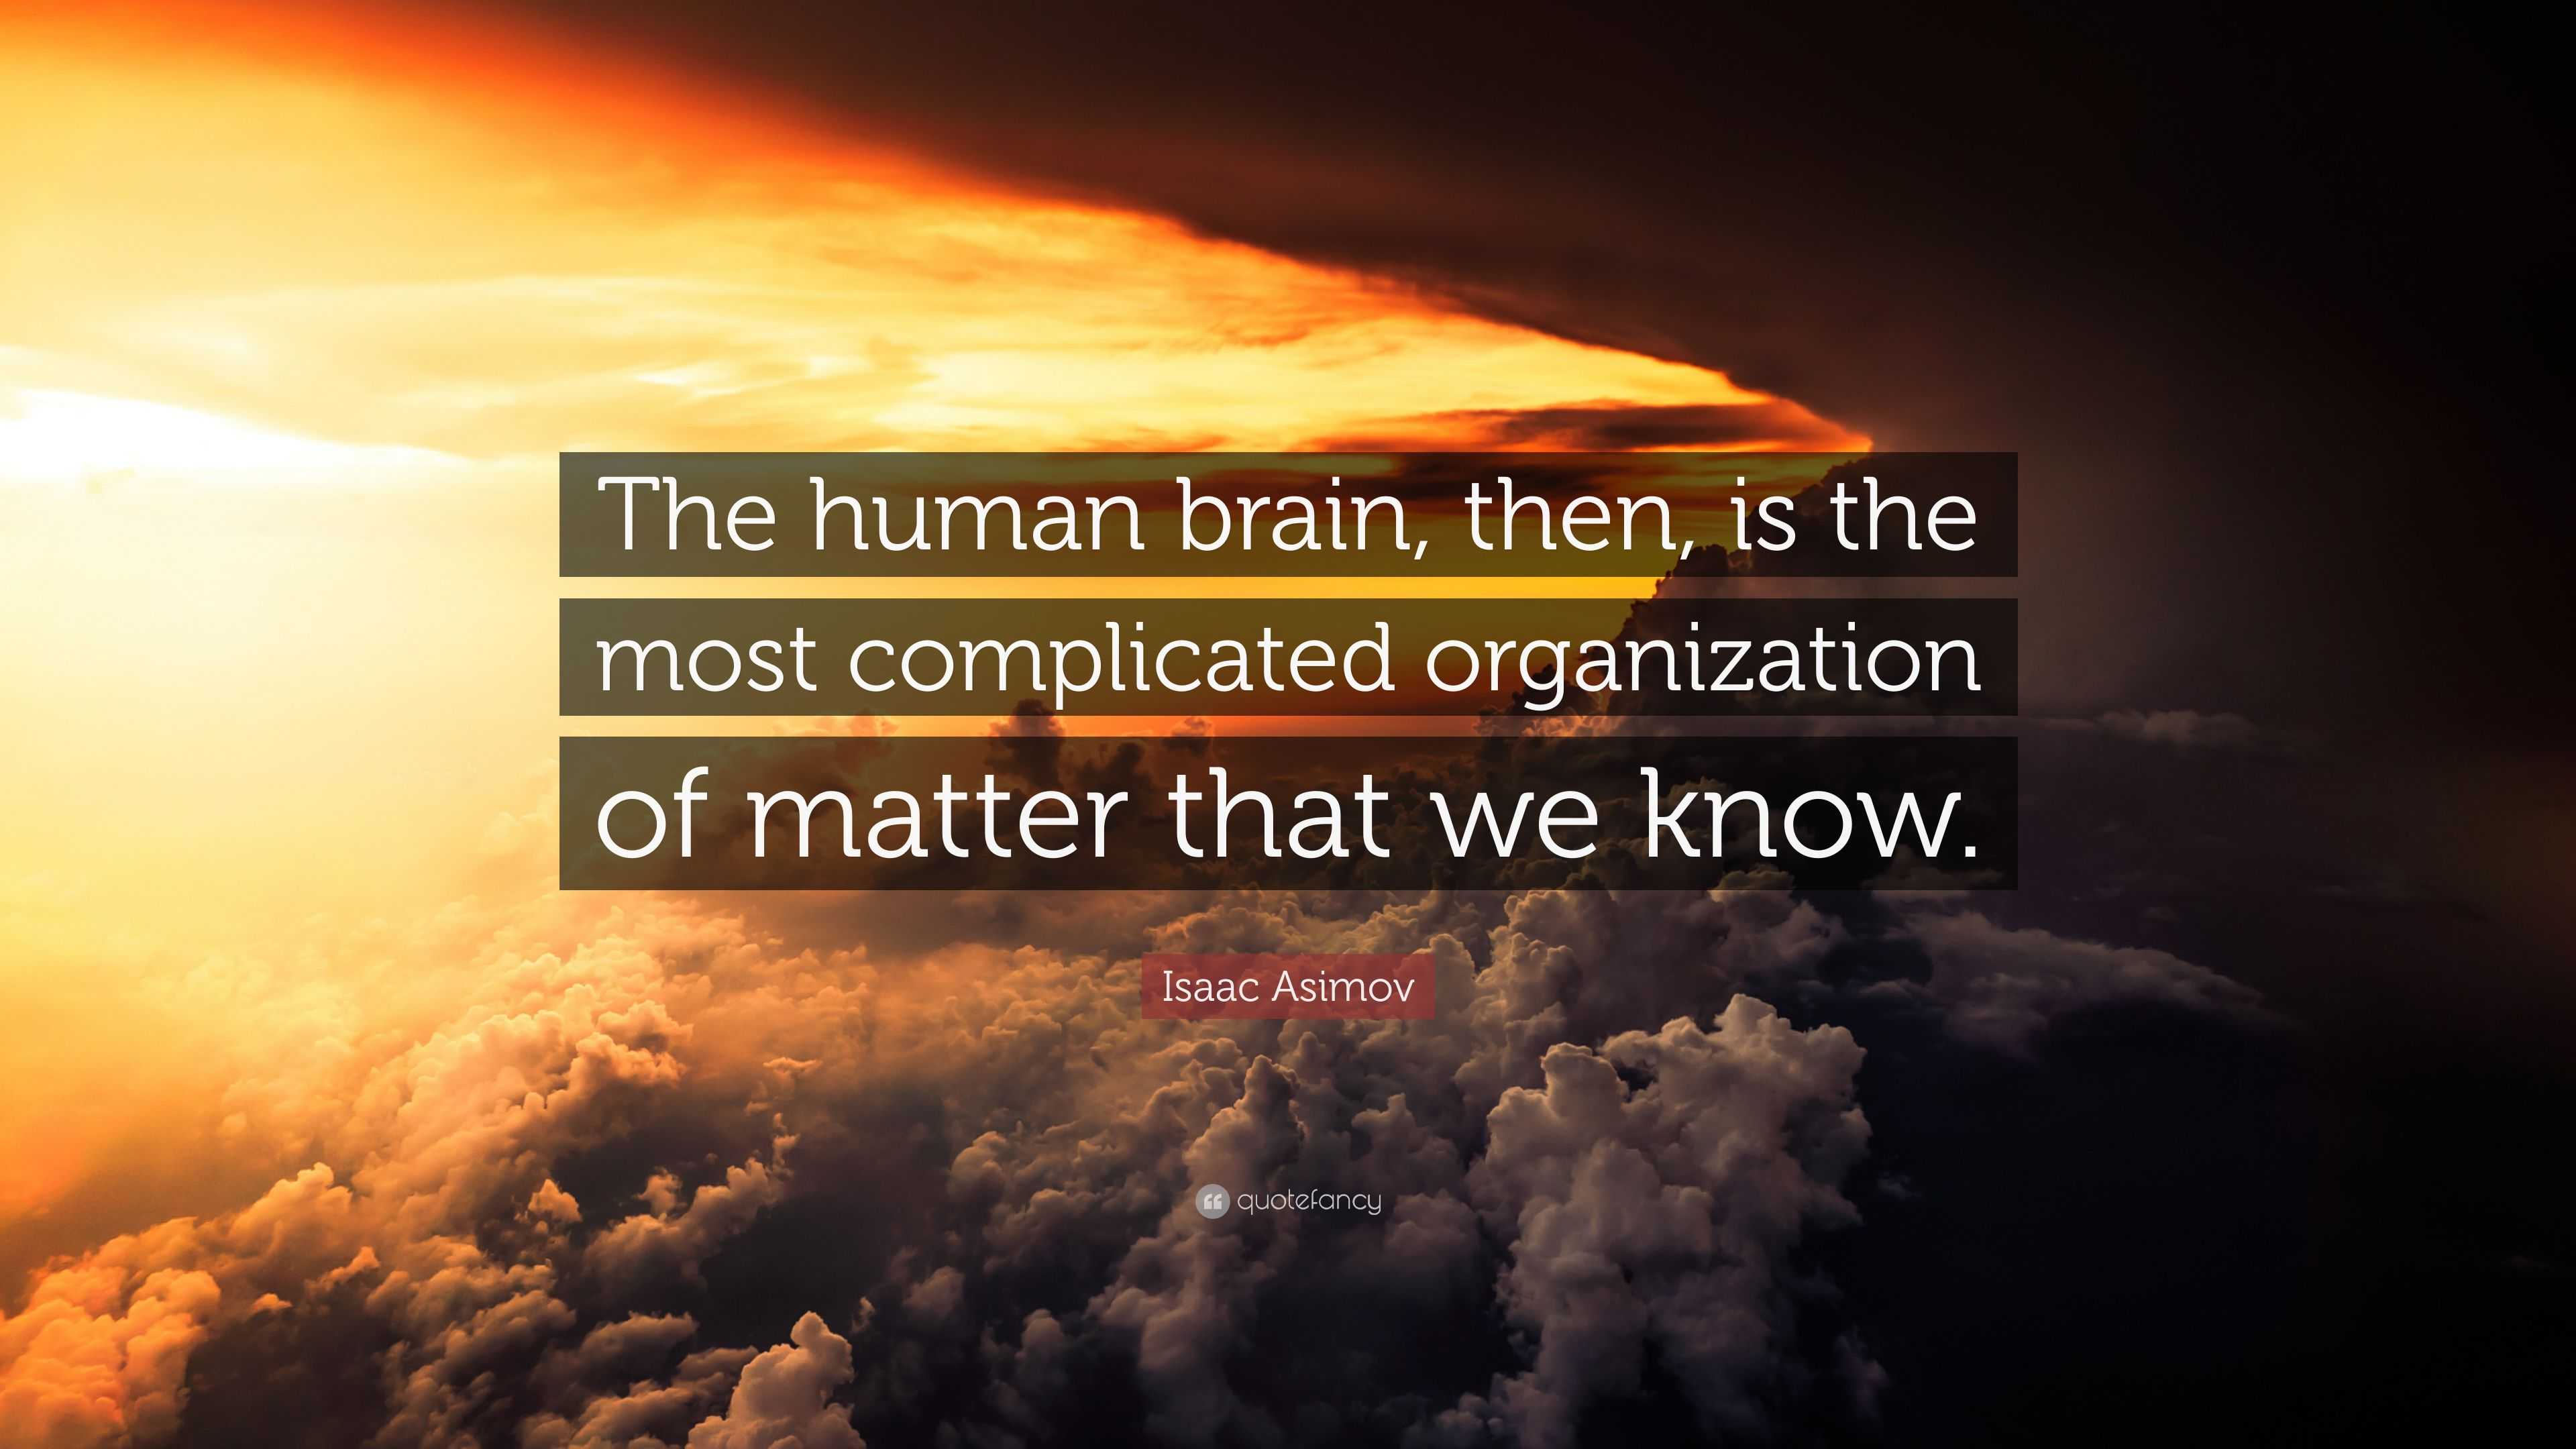 Isaac Asimov Quote: “The human brain, then, is the most complicated